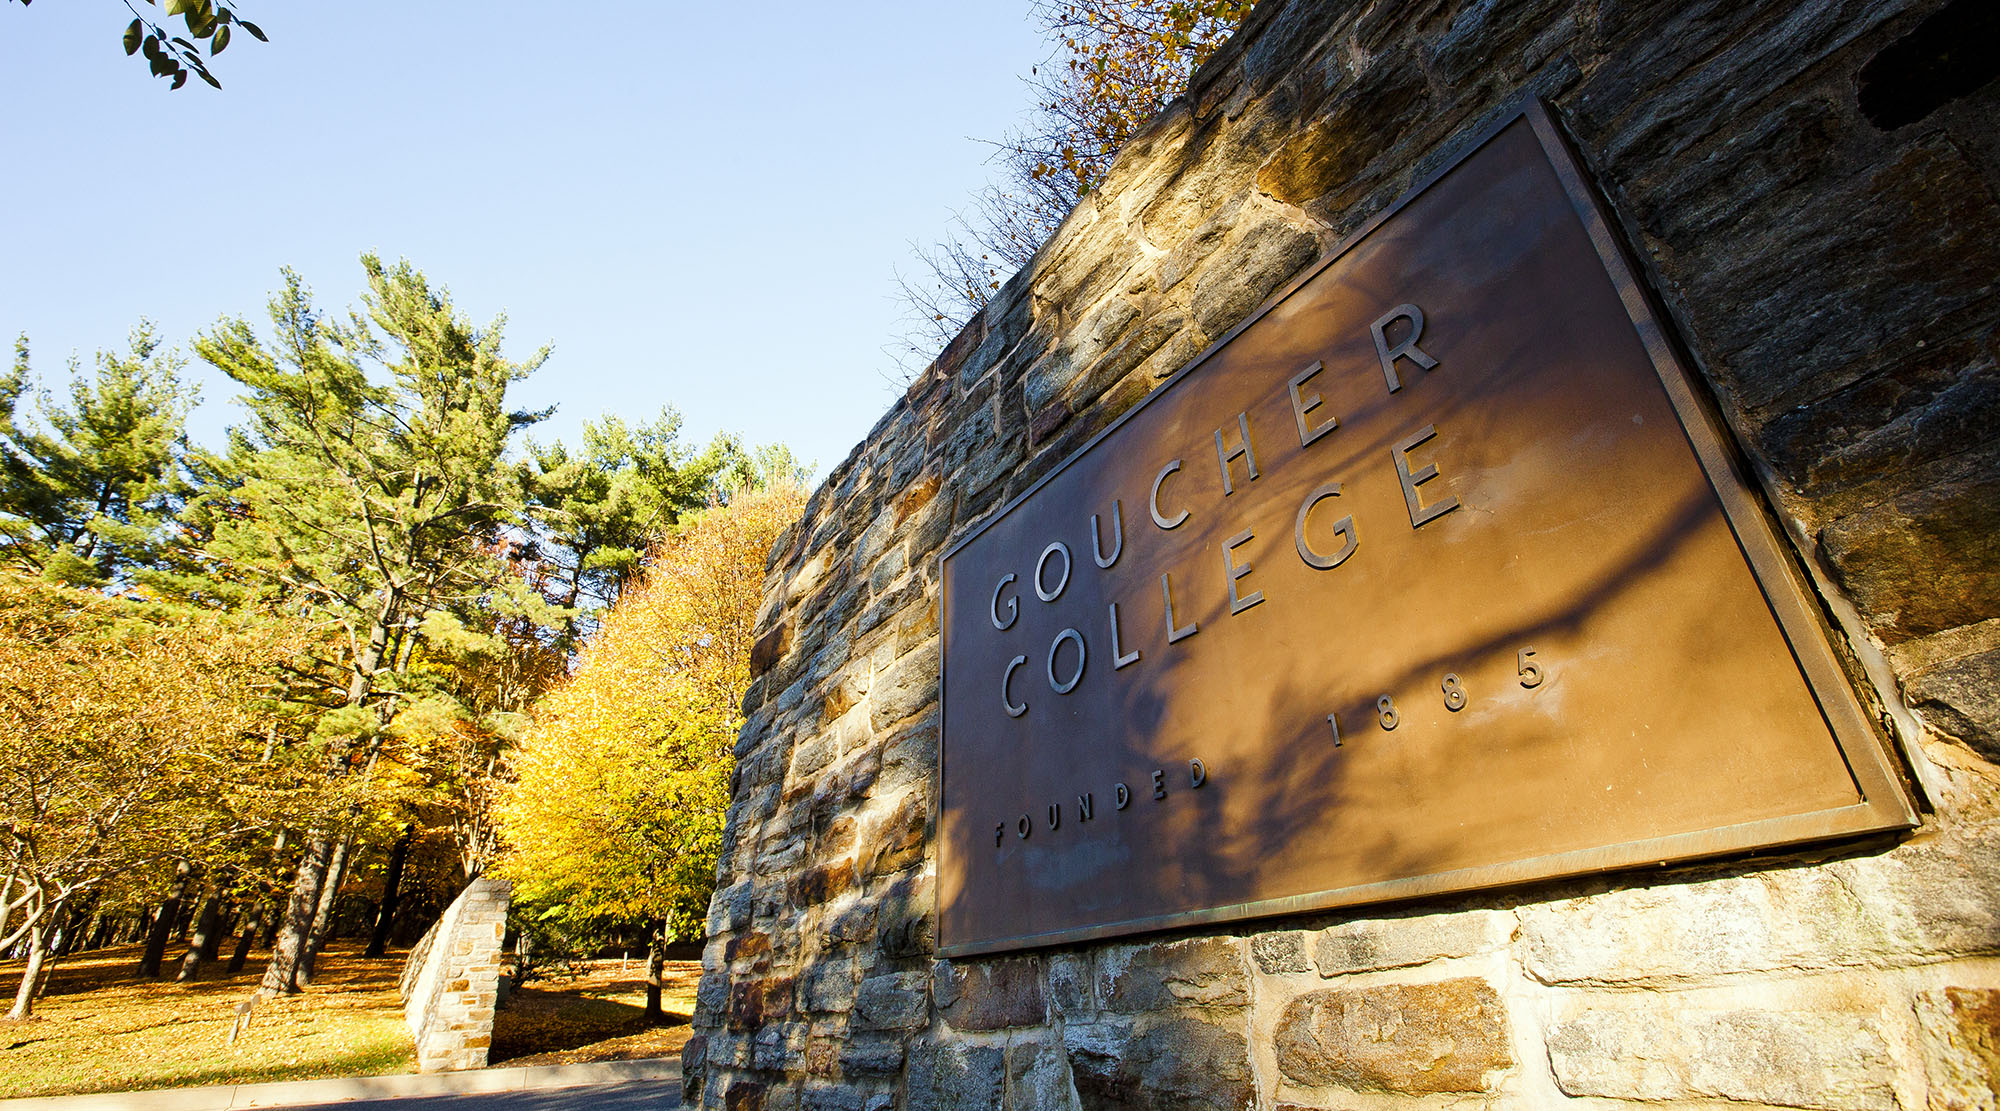 Goucher founding member of Liberal Arts College Racial Equity ...